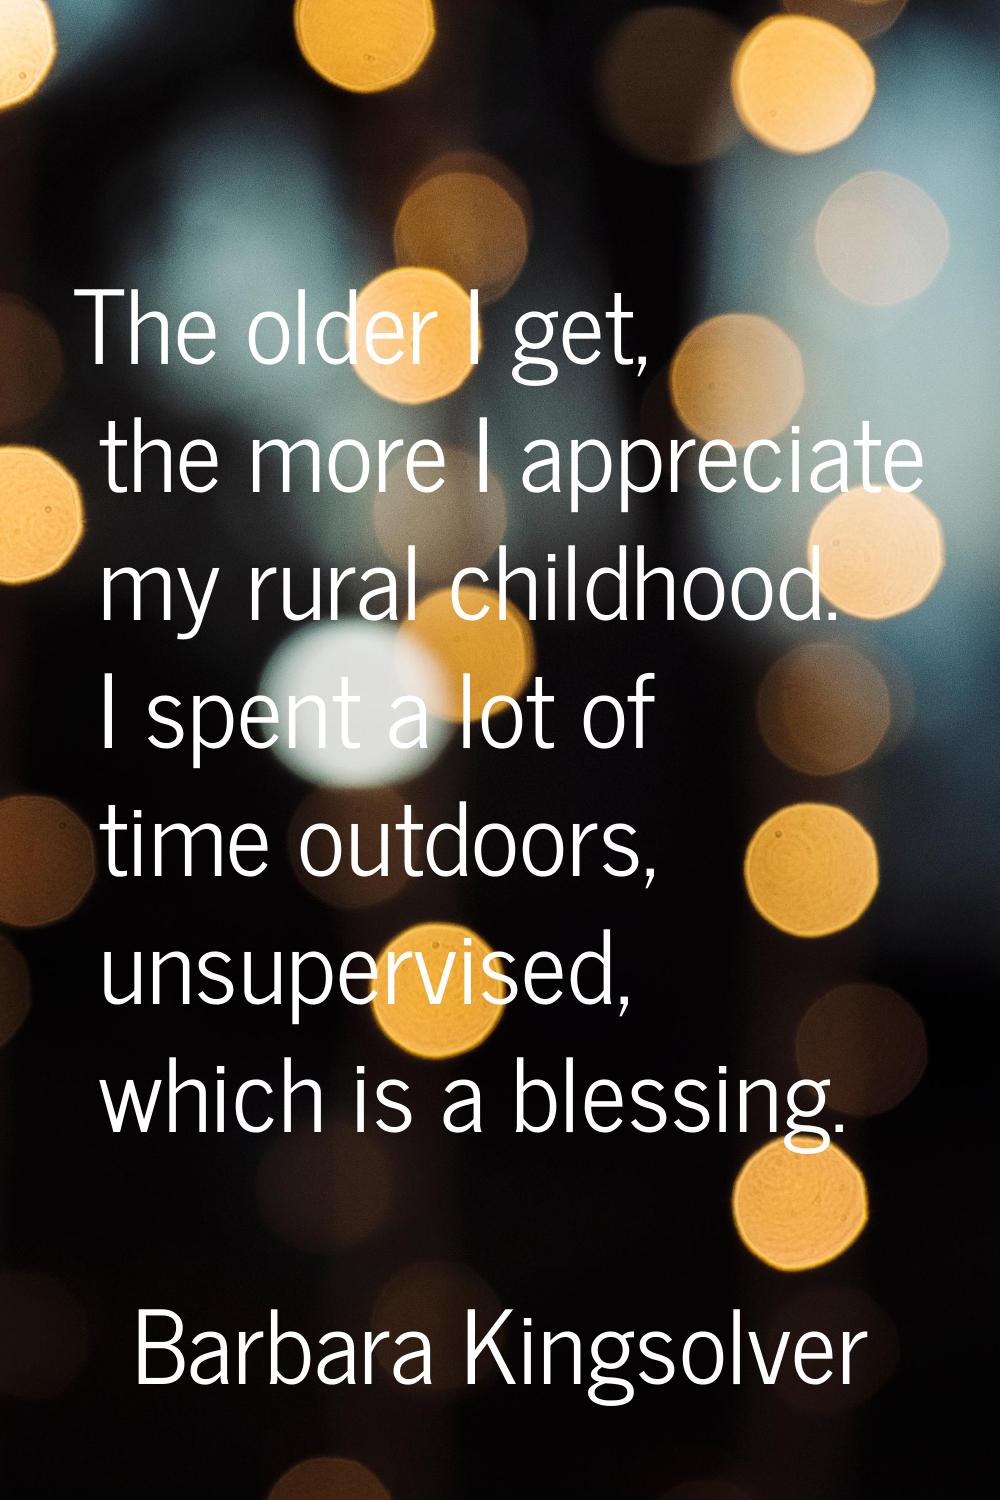 The older I get, the more I appreciate my rural childhood. I spent a lot of time outdoors, unsuperv